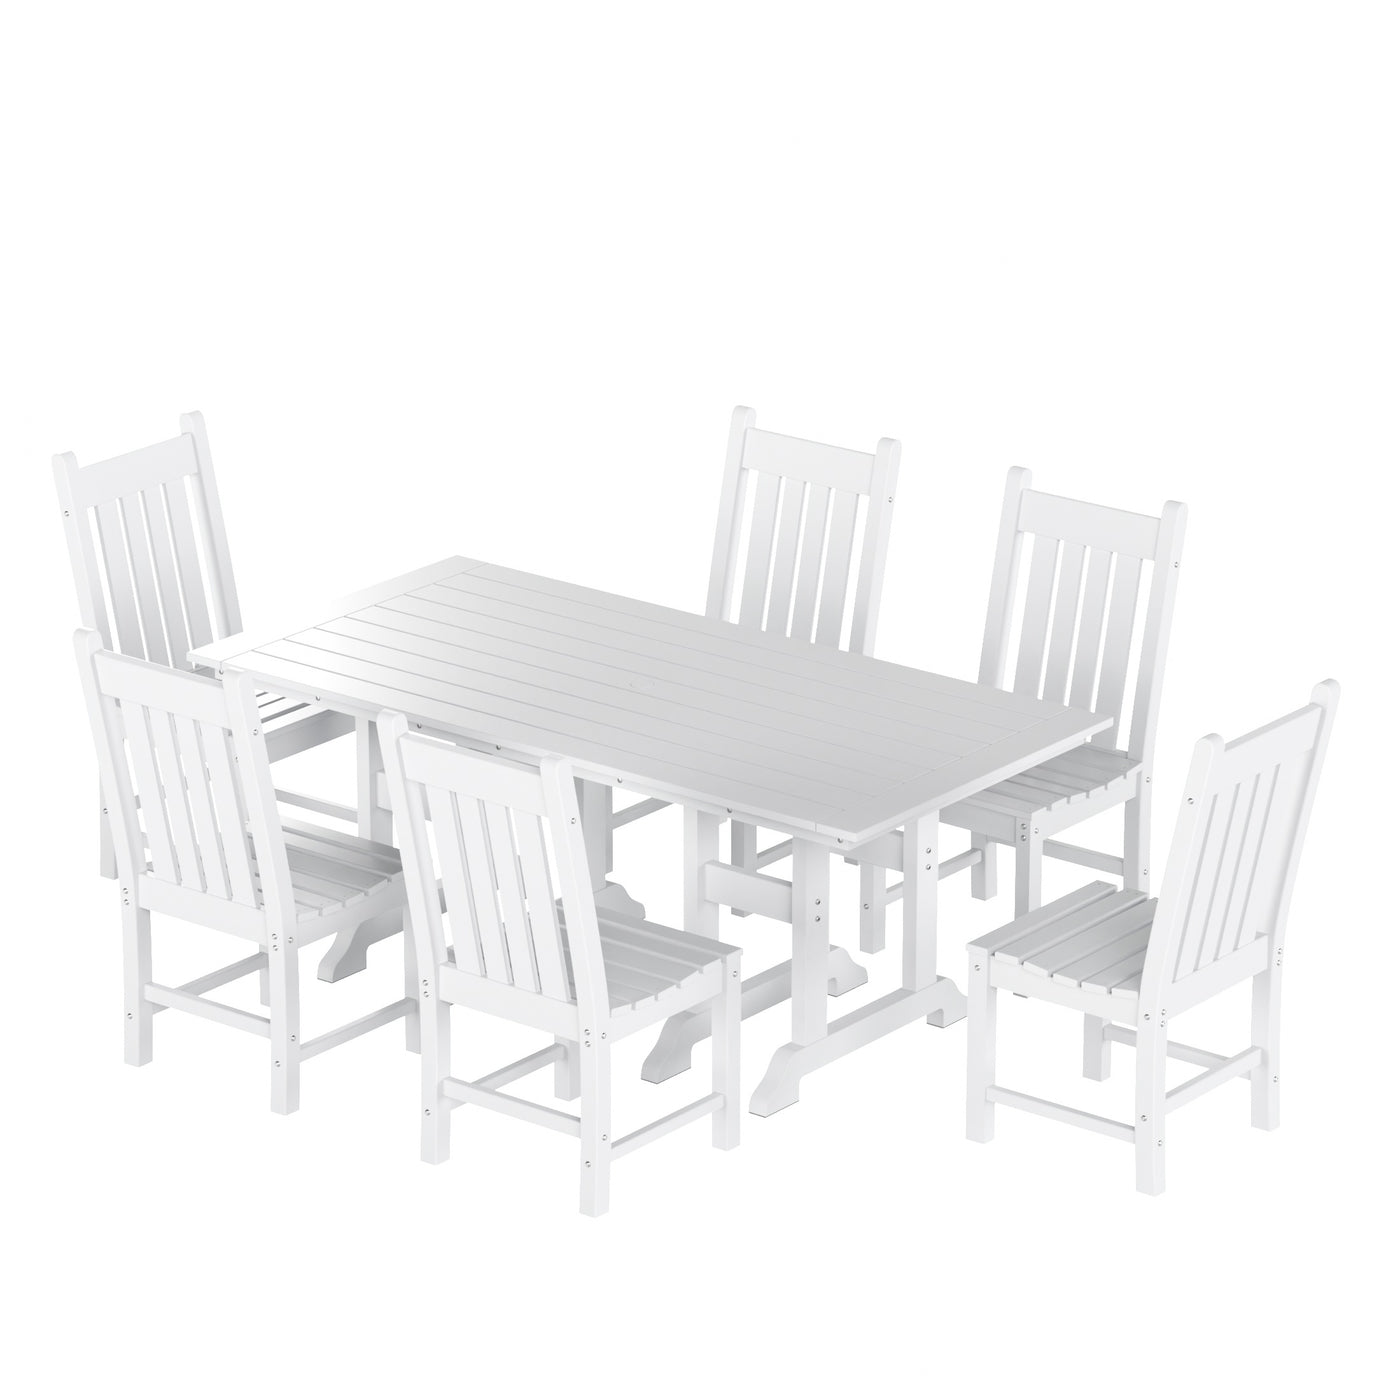 Malibu 7 Piece Outdoor Patio Dining Set Outdoor Dining Table with Side Chair